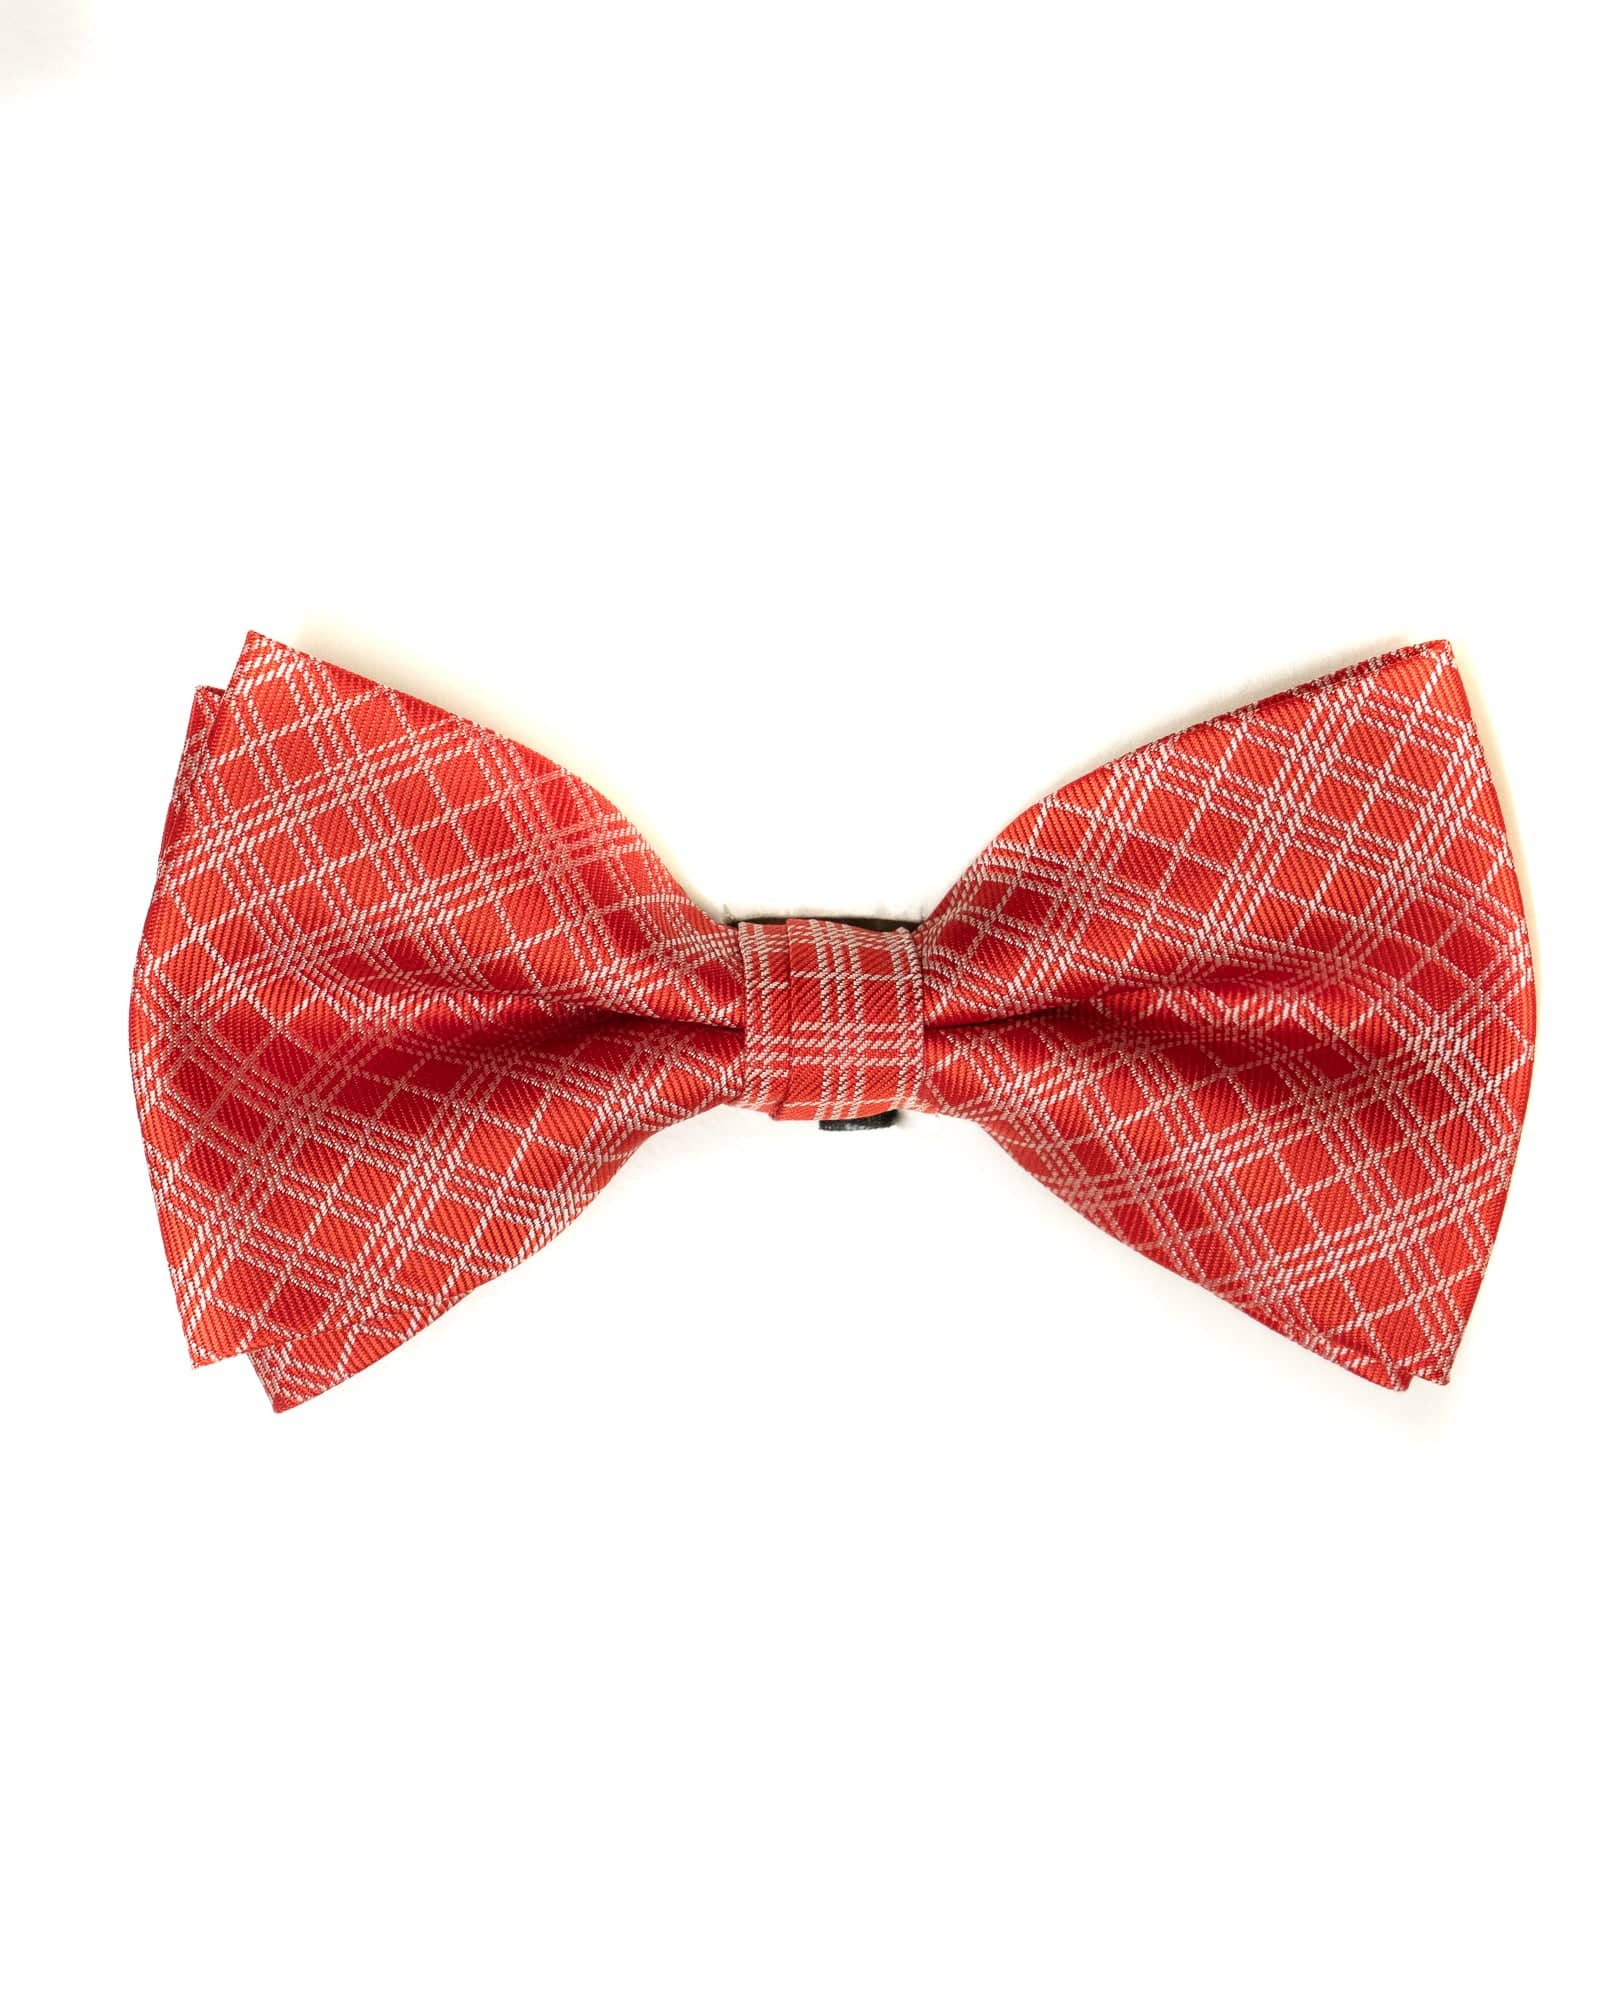 Bow Tie In Plaid Pattern Red & Grey - Rainwater's Men's Clothing and Tuxedo Rental